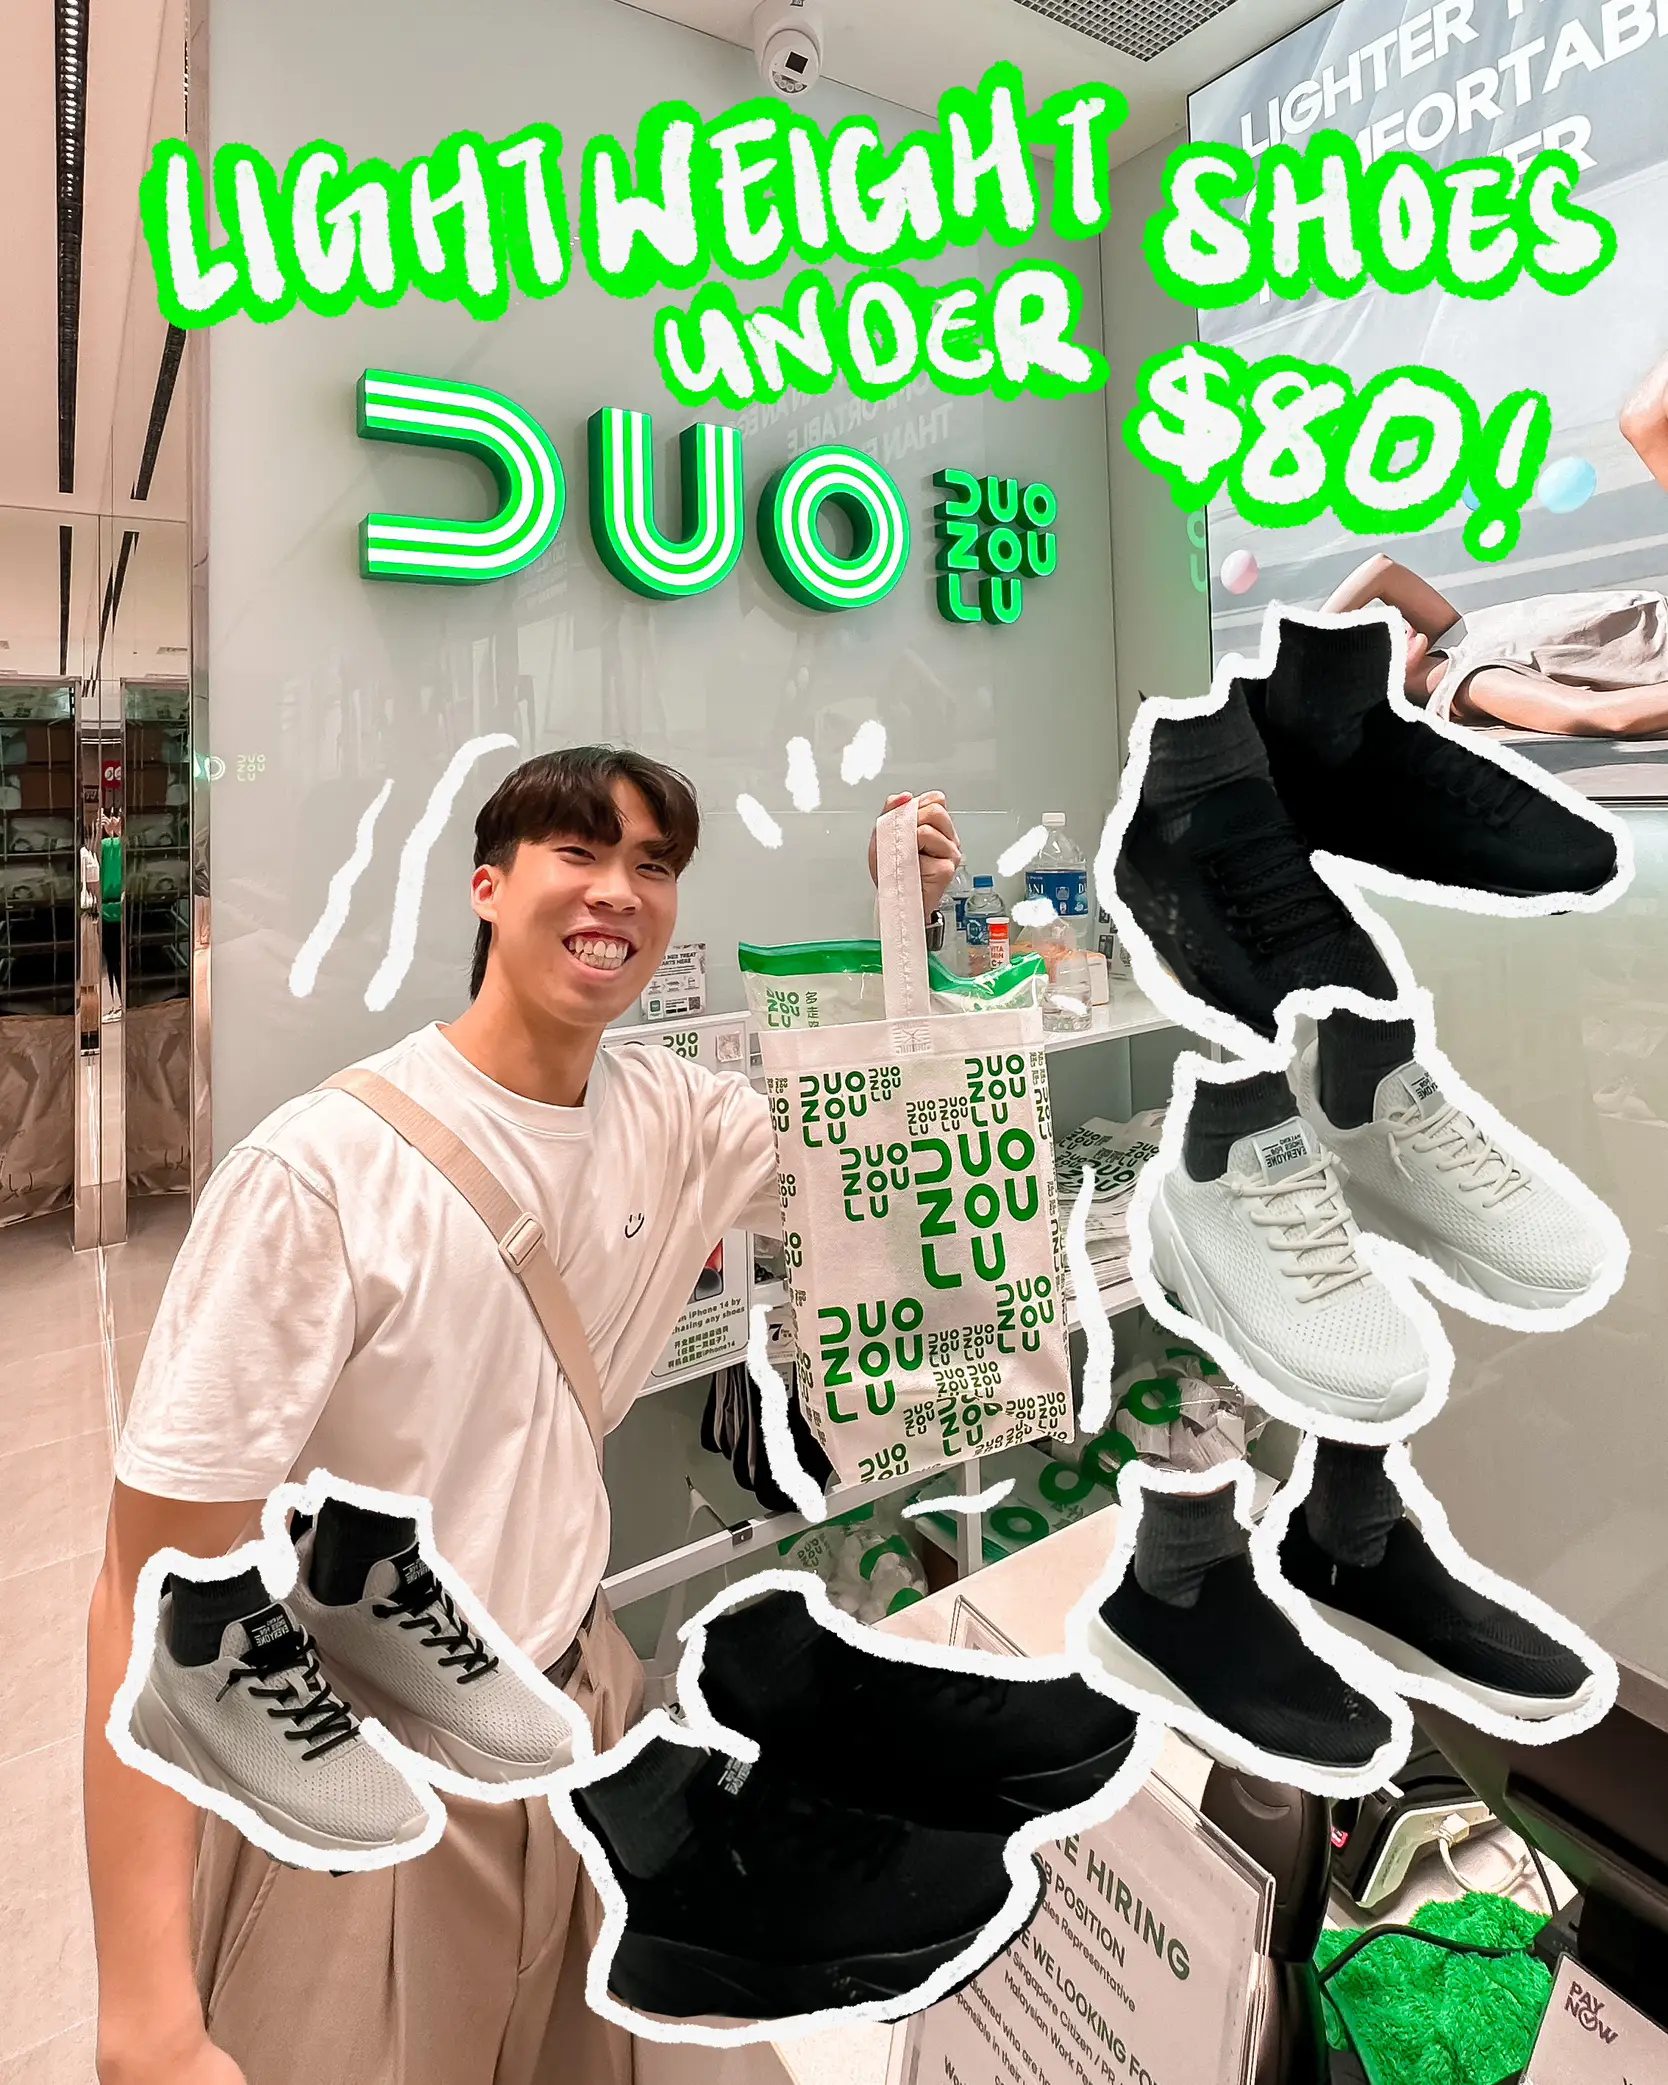 <NEW> Lightweight and comfy shoes UNDER $80 SGD 👟🏃🏻‍♂️'s images(0)